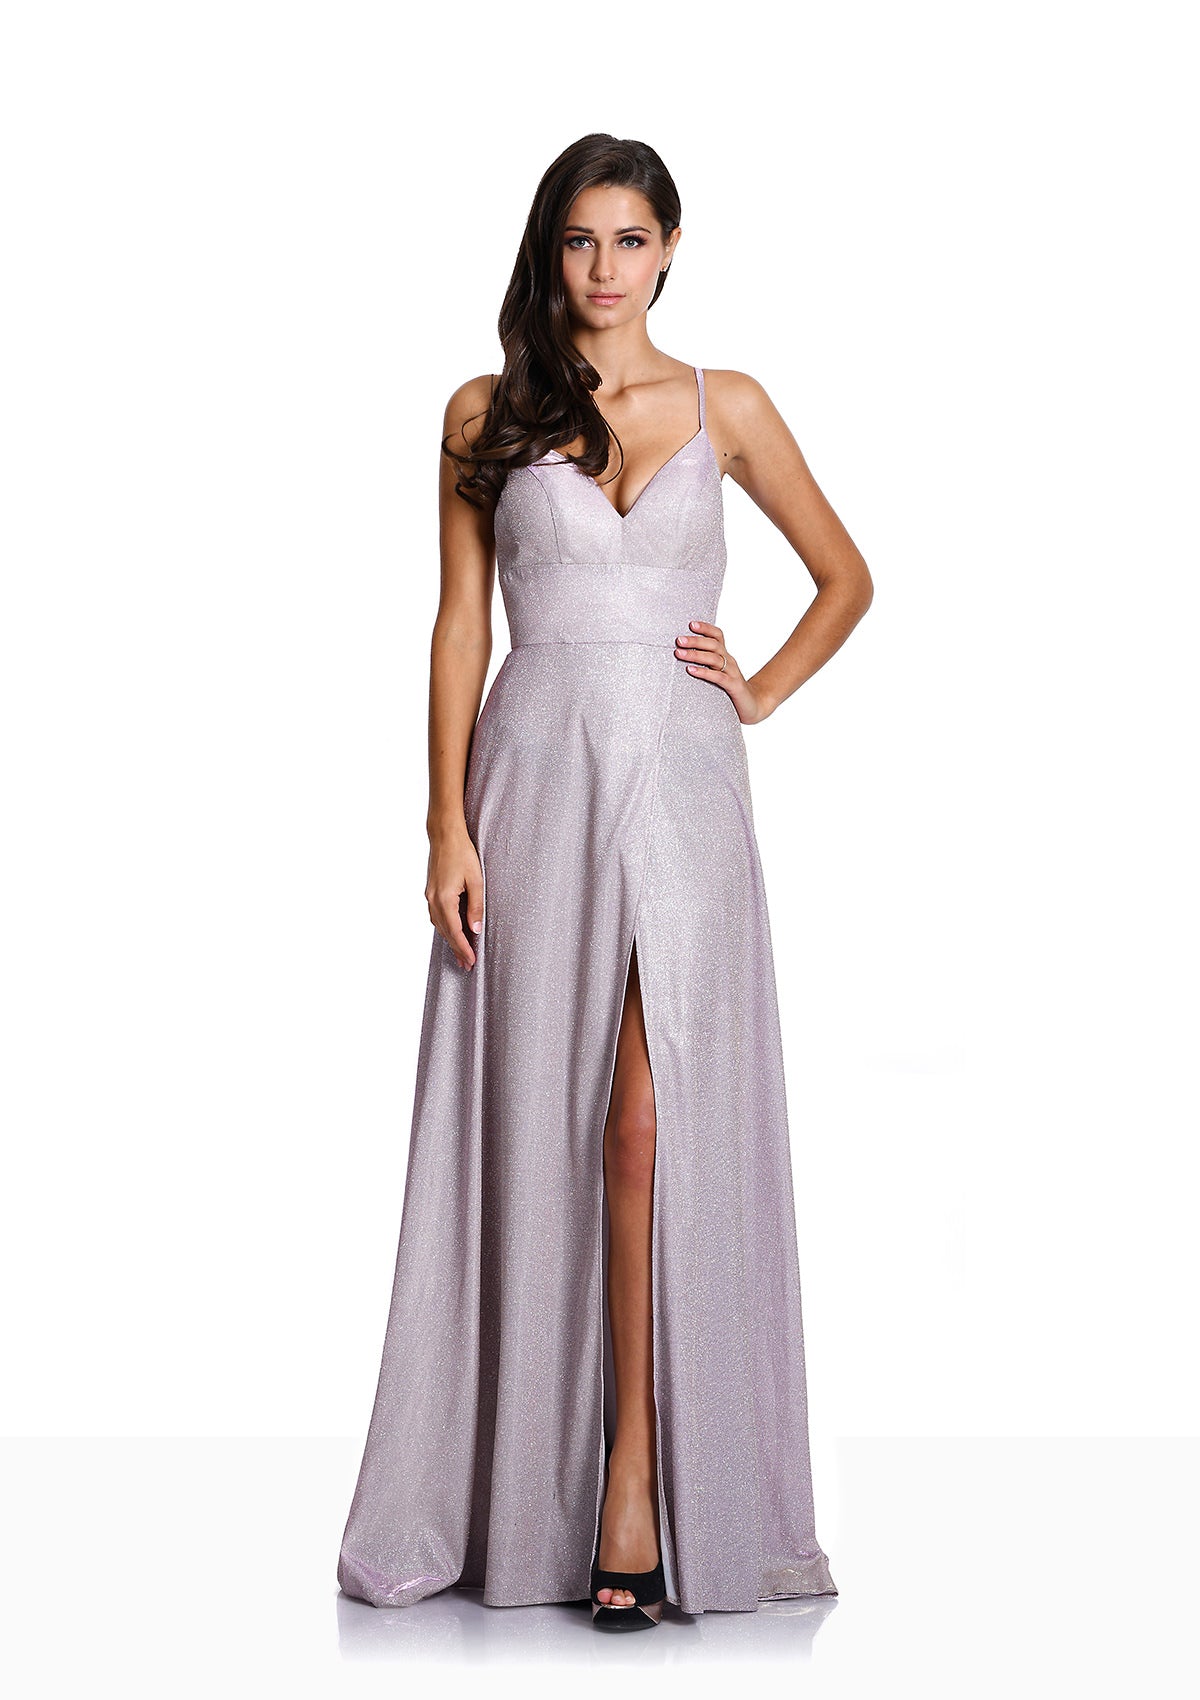 Glitter A line floaty dress with leg slit. Perfect prom dress with sweetheart neckline. Pretty spaghetti straps.